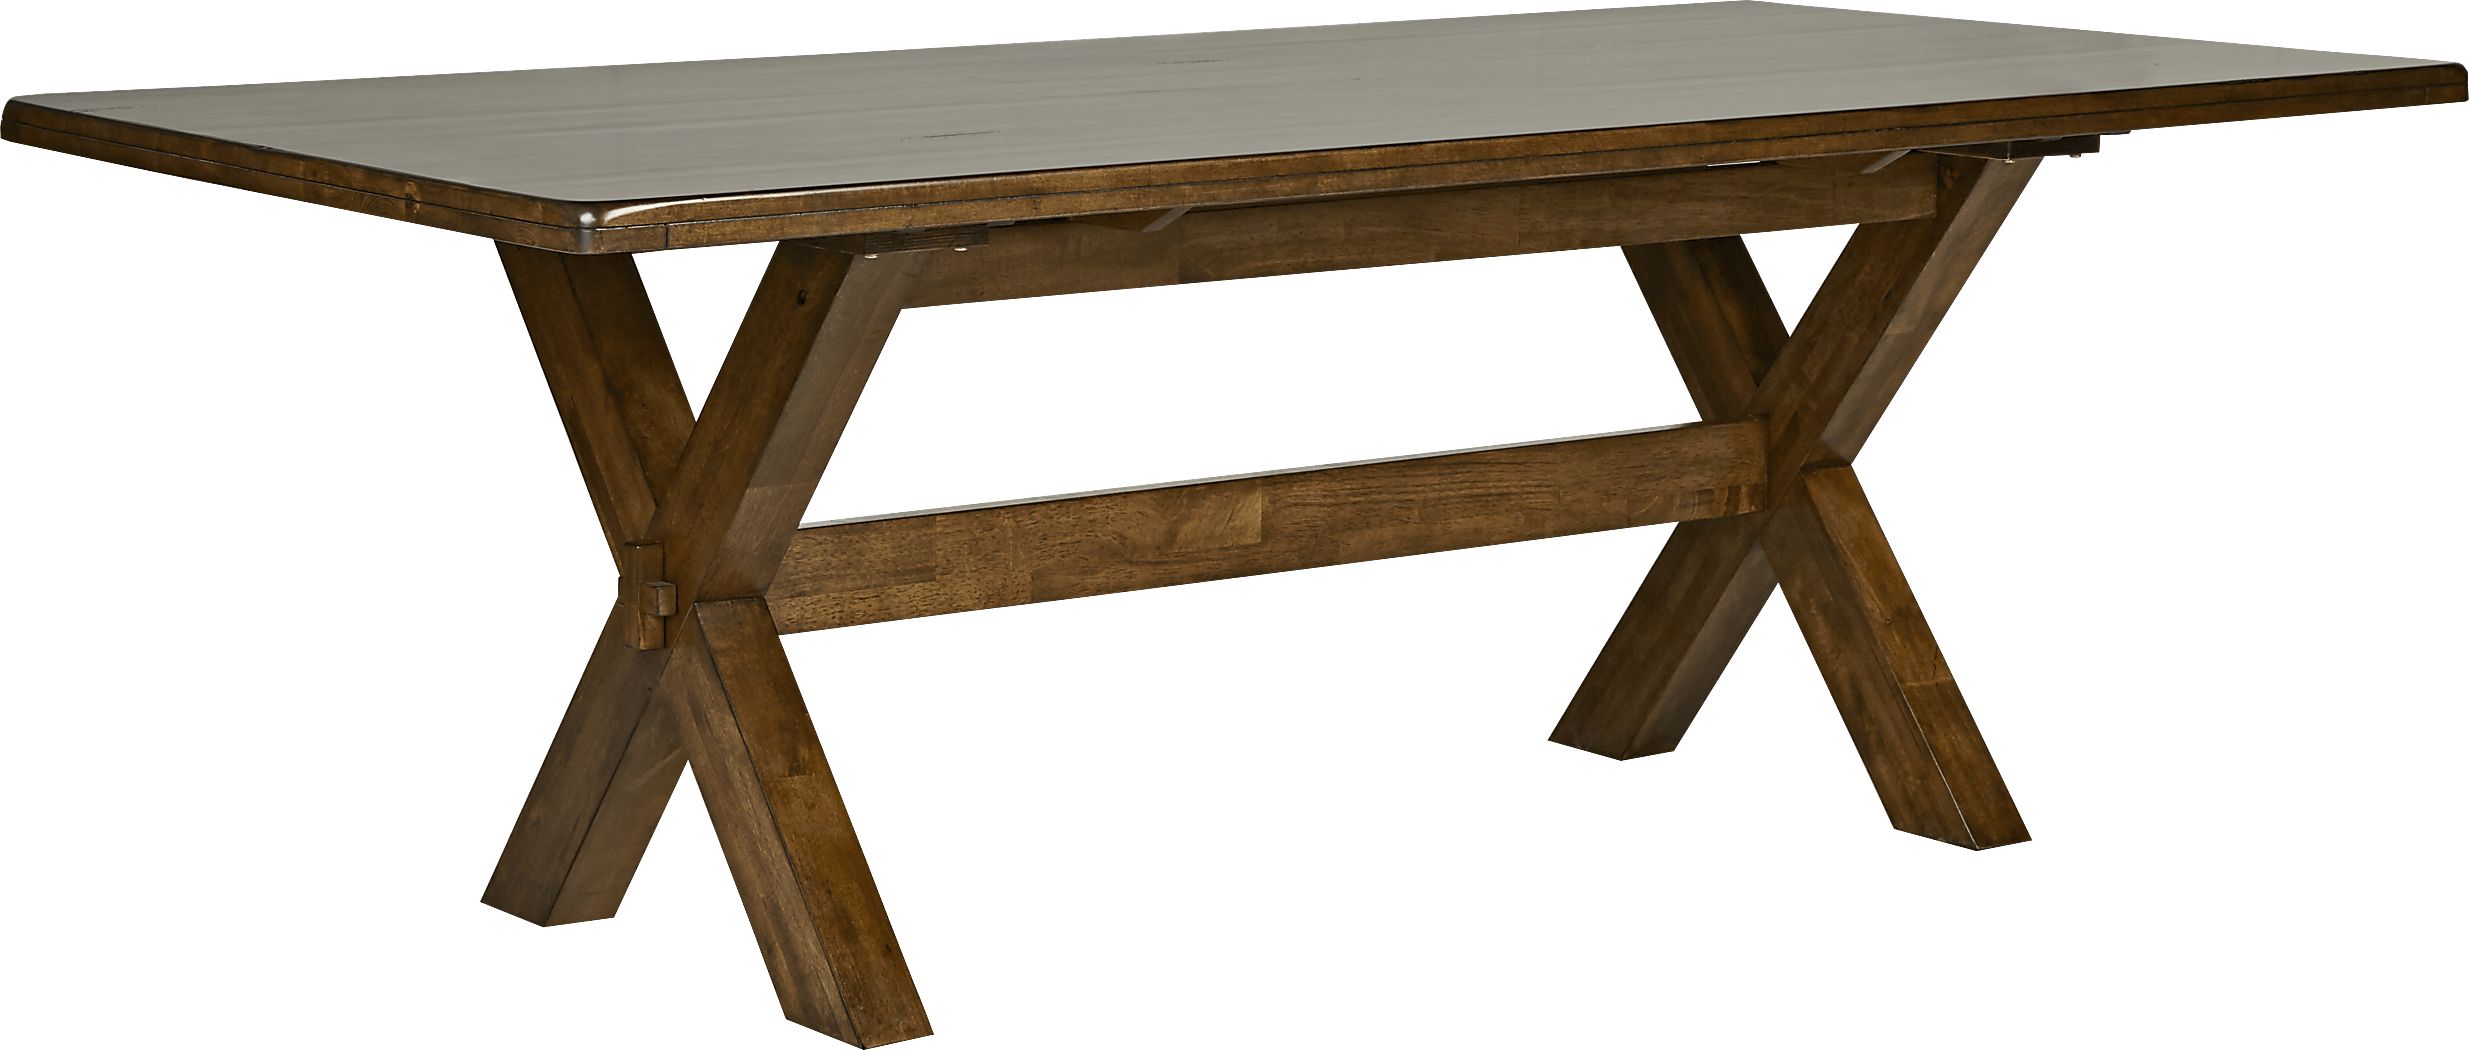  rectangle Dining Table